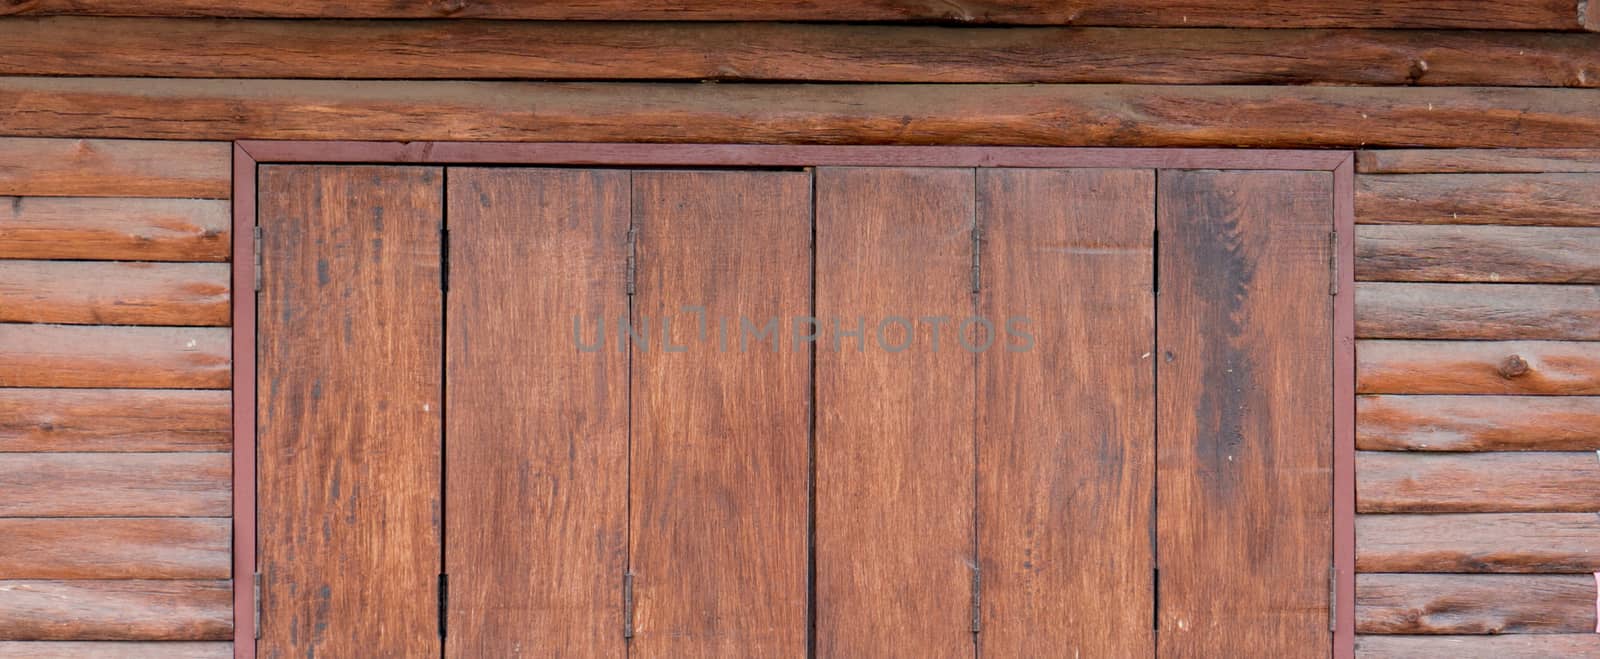 Old wood texture background. Unique pattern wood background.